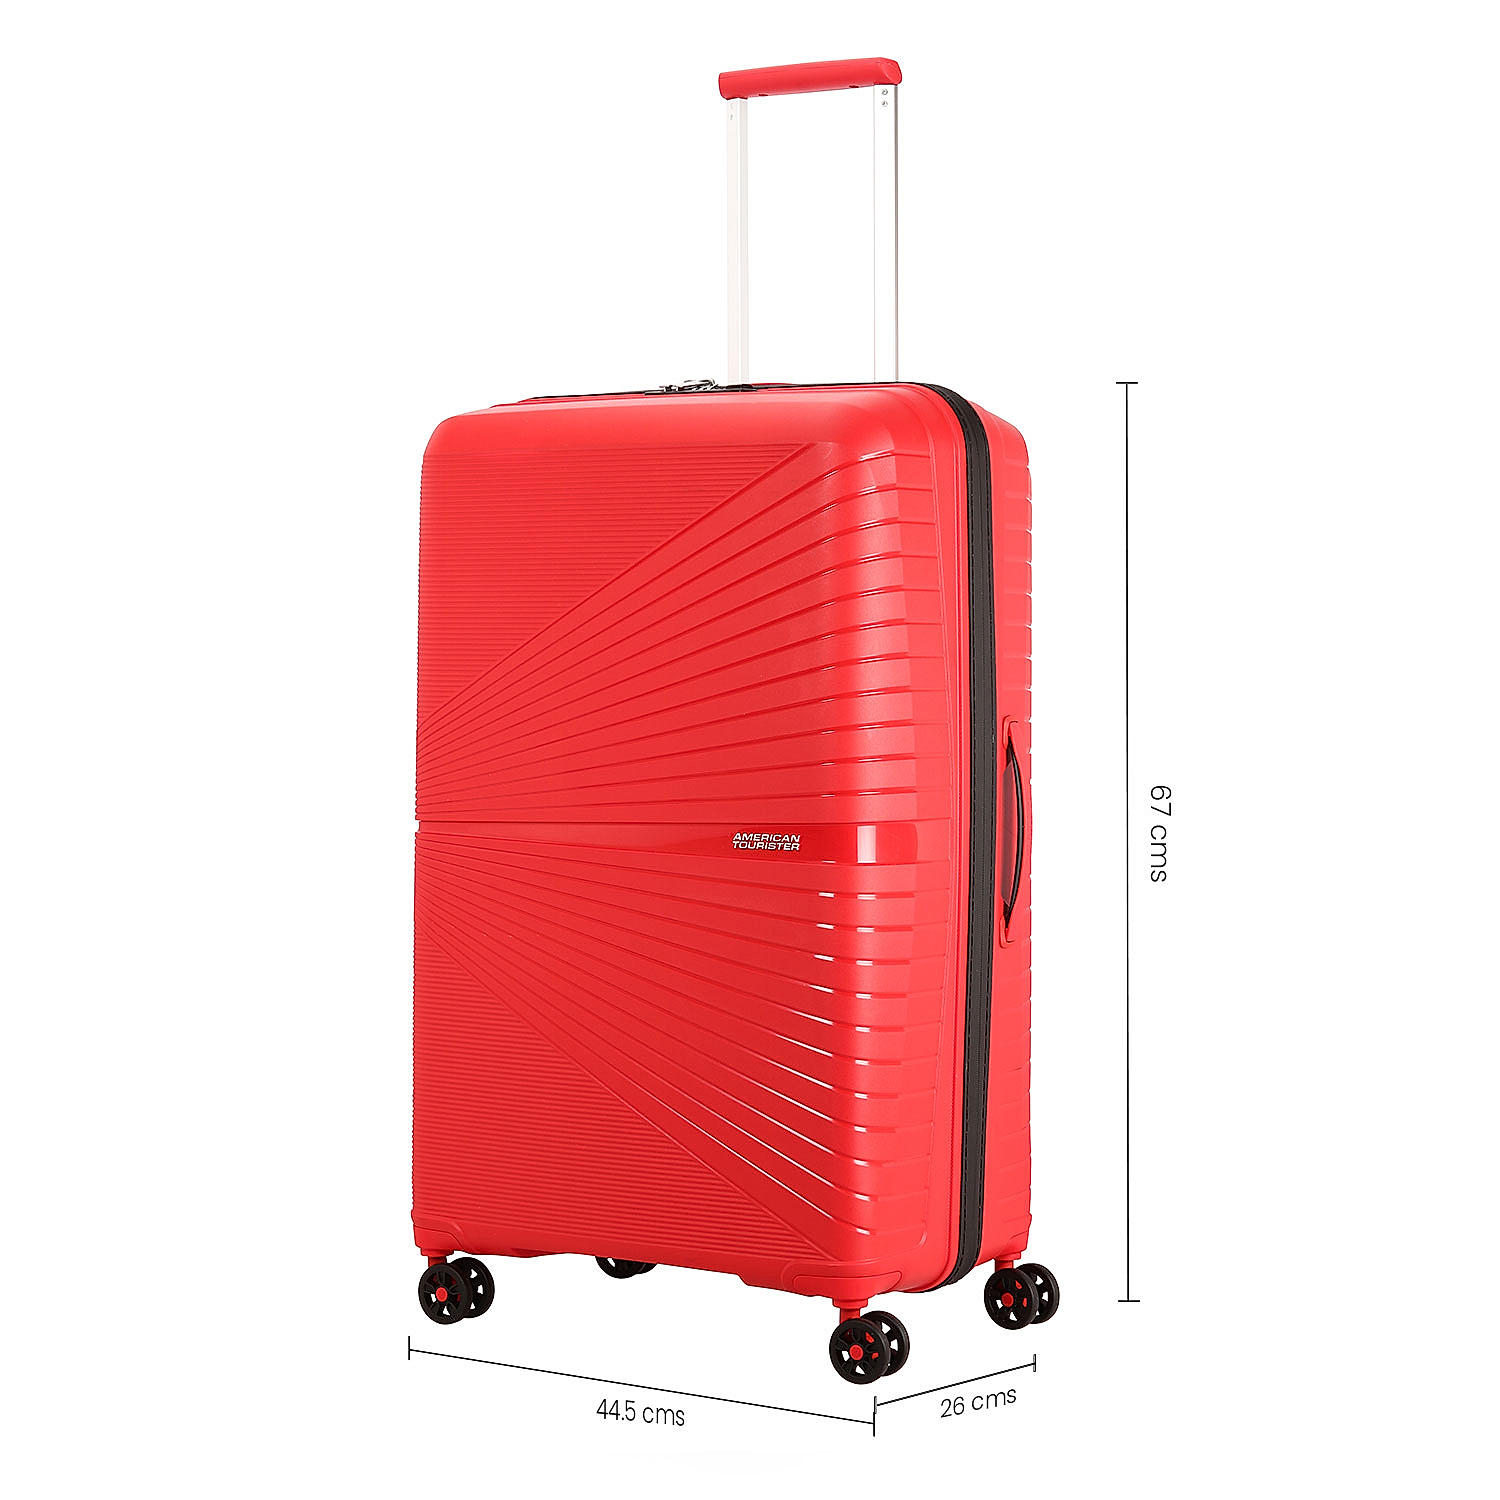 Best Luggage Brands in India: Top Picks From American Tourister, Skybags,  And More